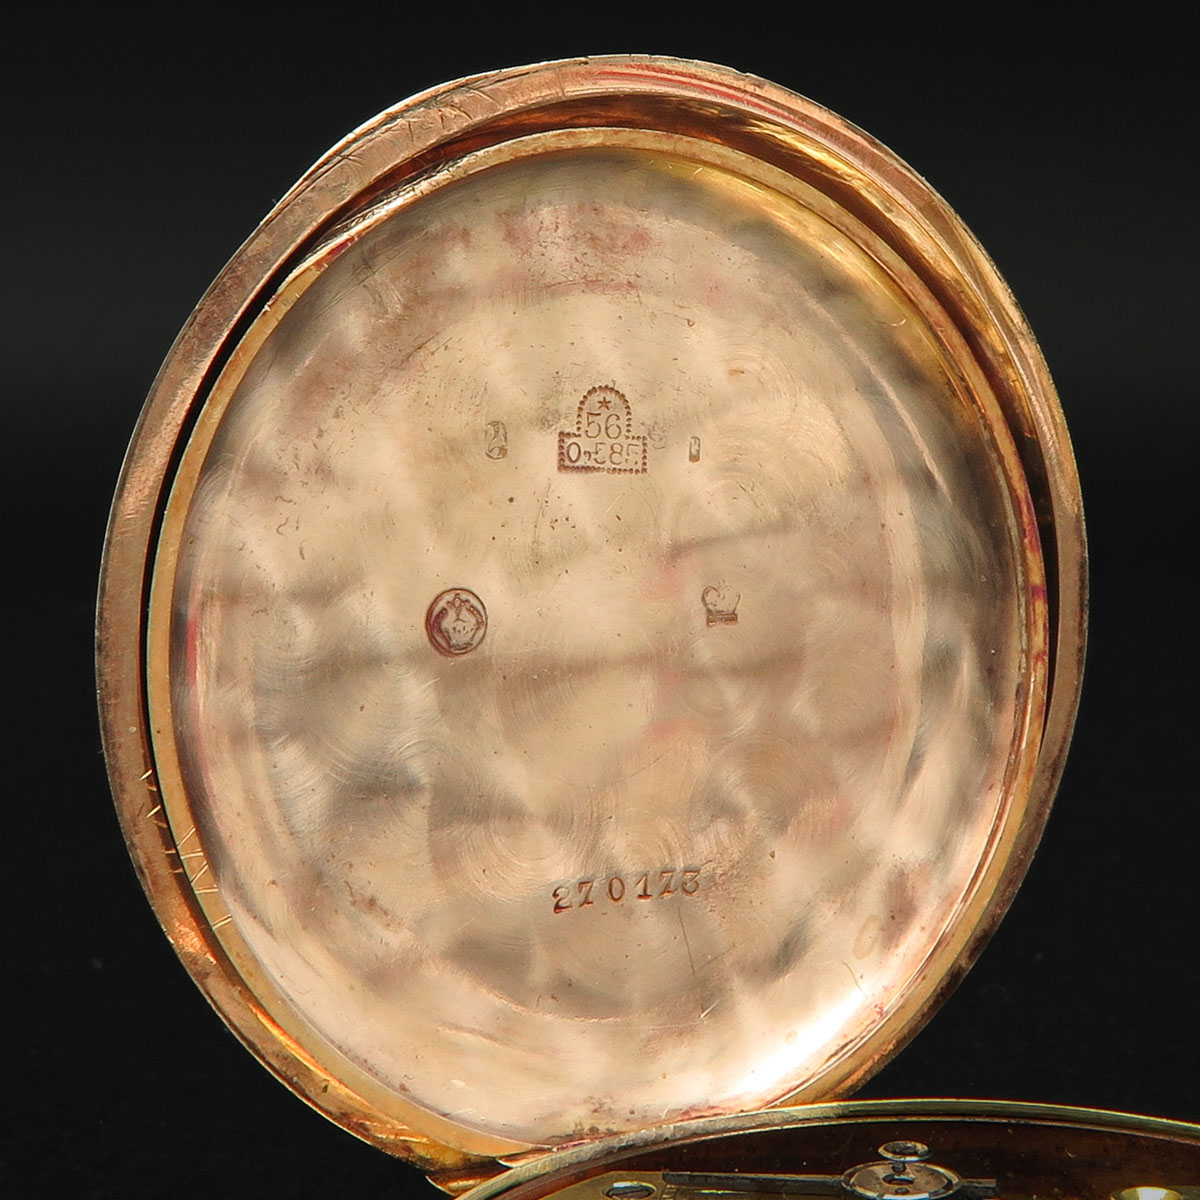 A 14k Gold Pocket Watch - Image 6 of 8